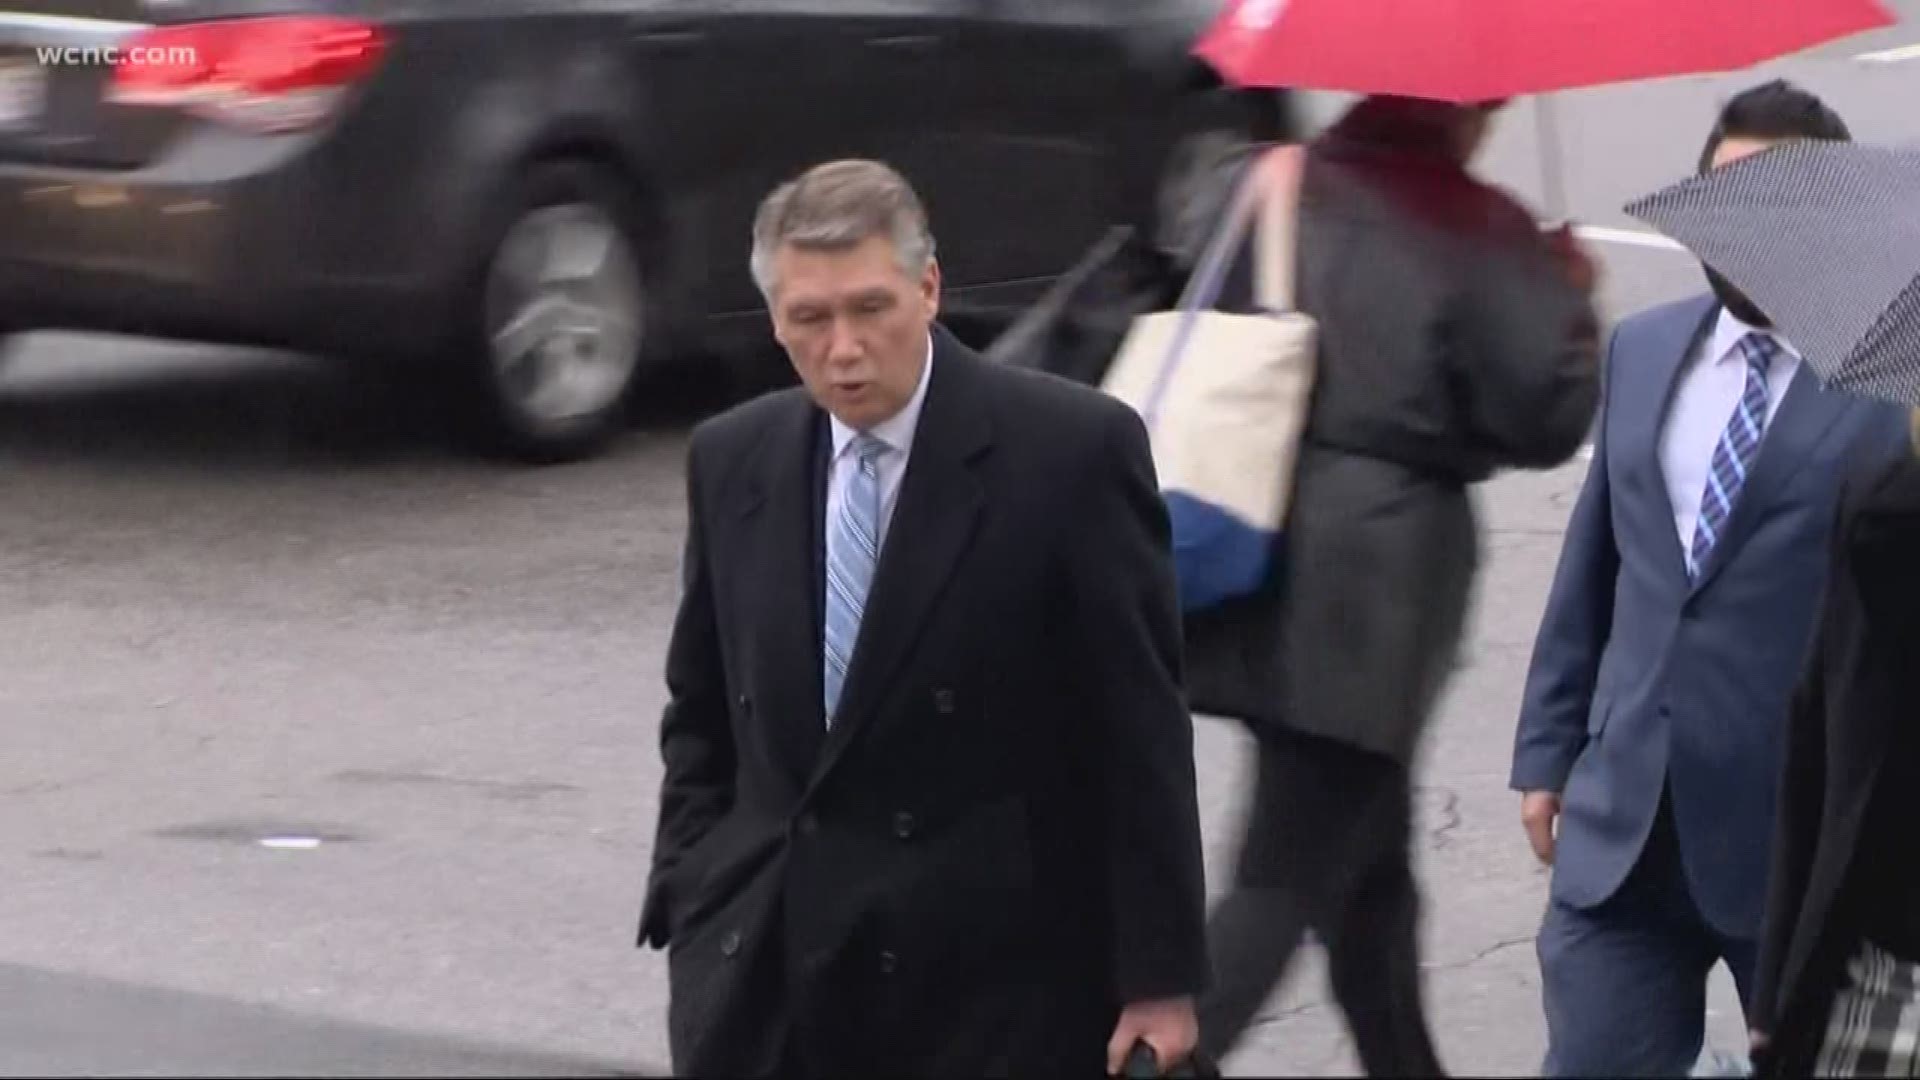 The hearing over fraud allegations in North Carolina's 9th District continued Wednesday with Republican Mark Harris expected to testify before the state board of elections.